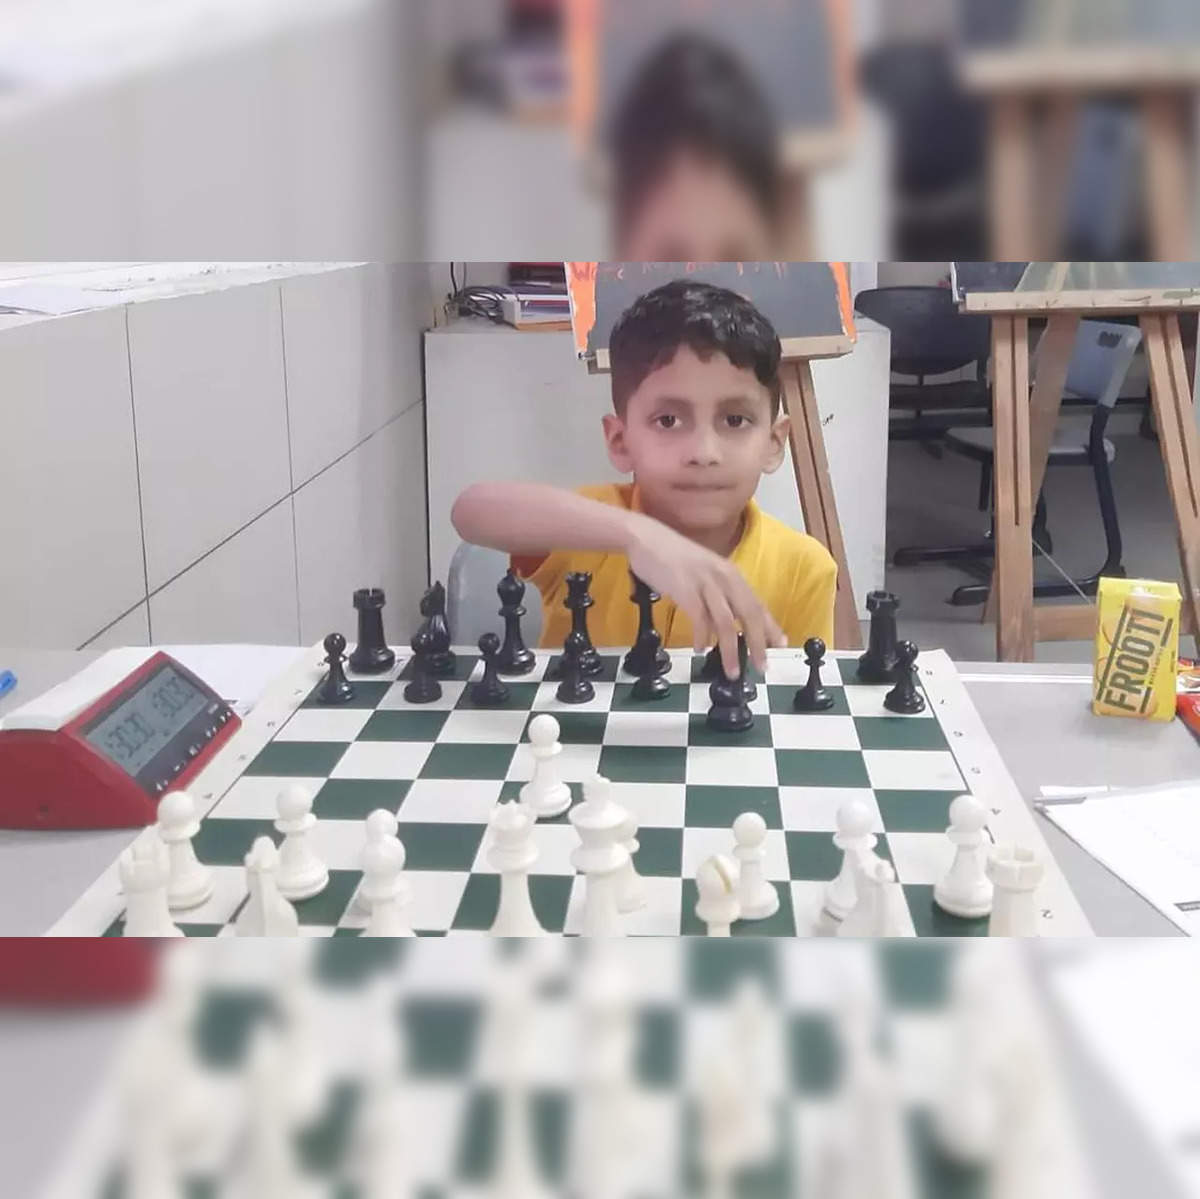 Meet India's 5-year-old chess prodigy Tejas Tiwari - World's youngest  player with FIDE rating